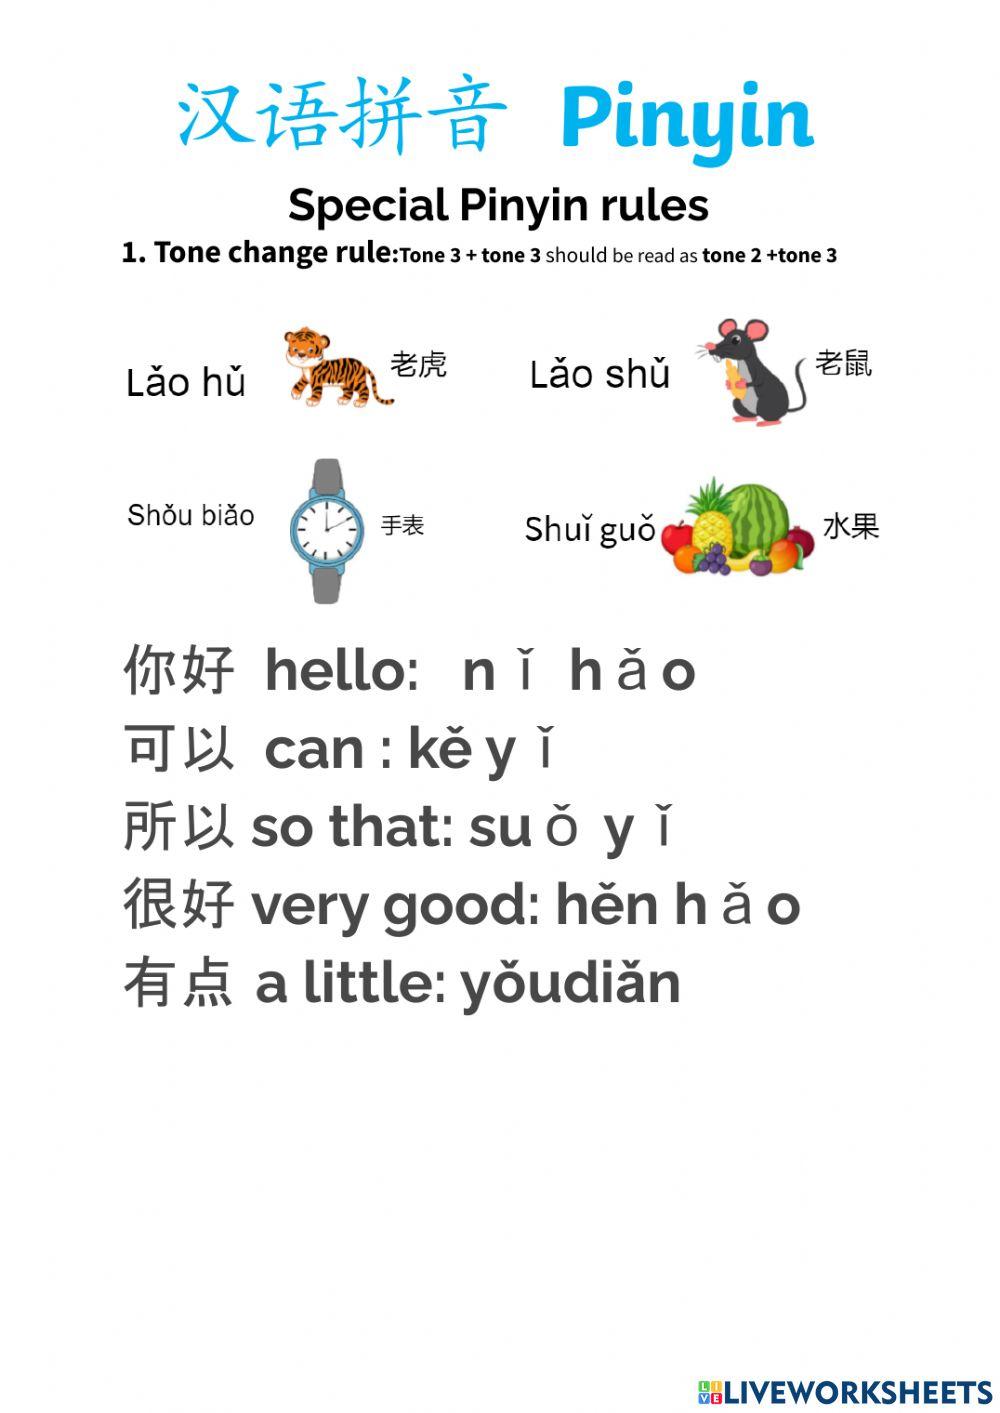 Pinyin special rules